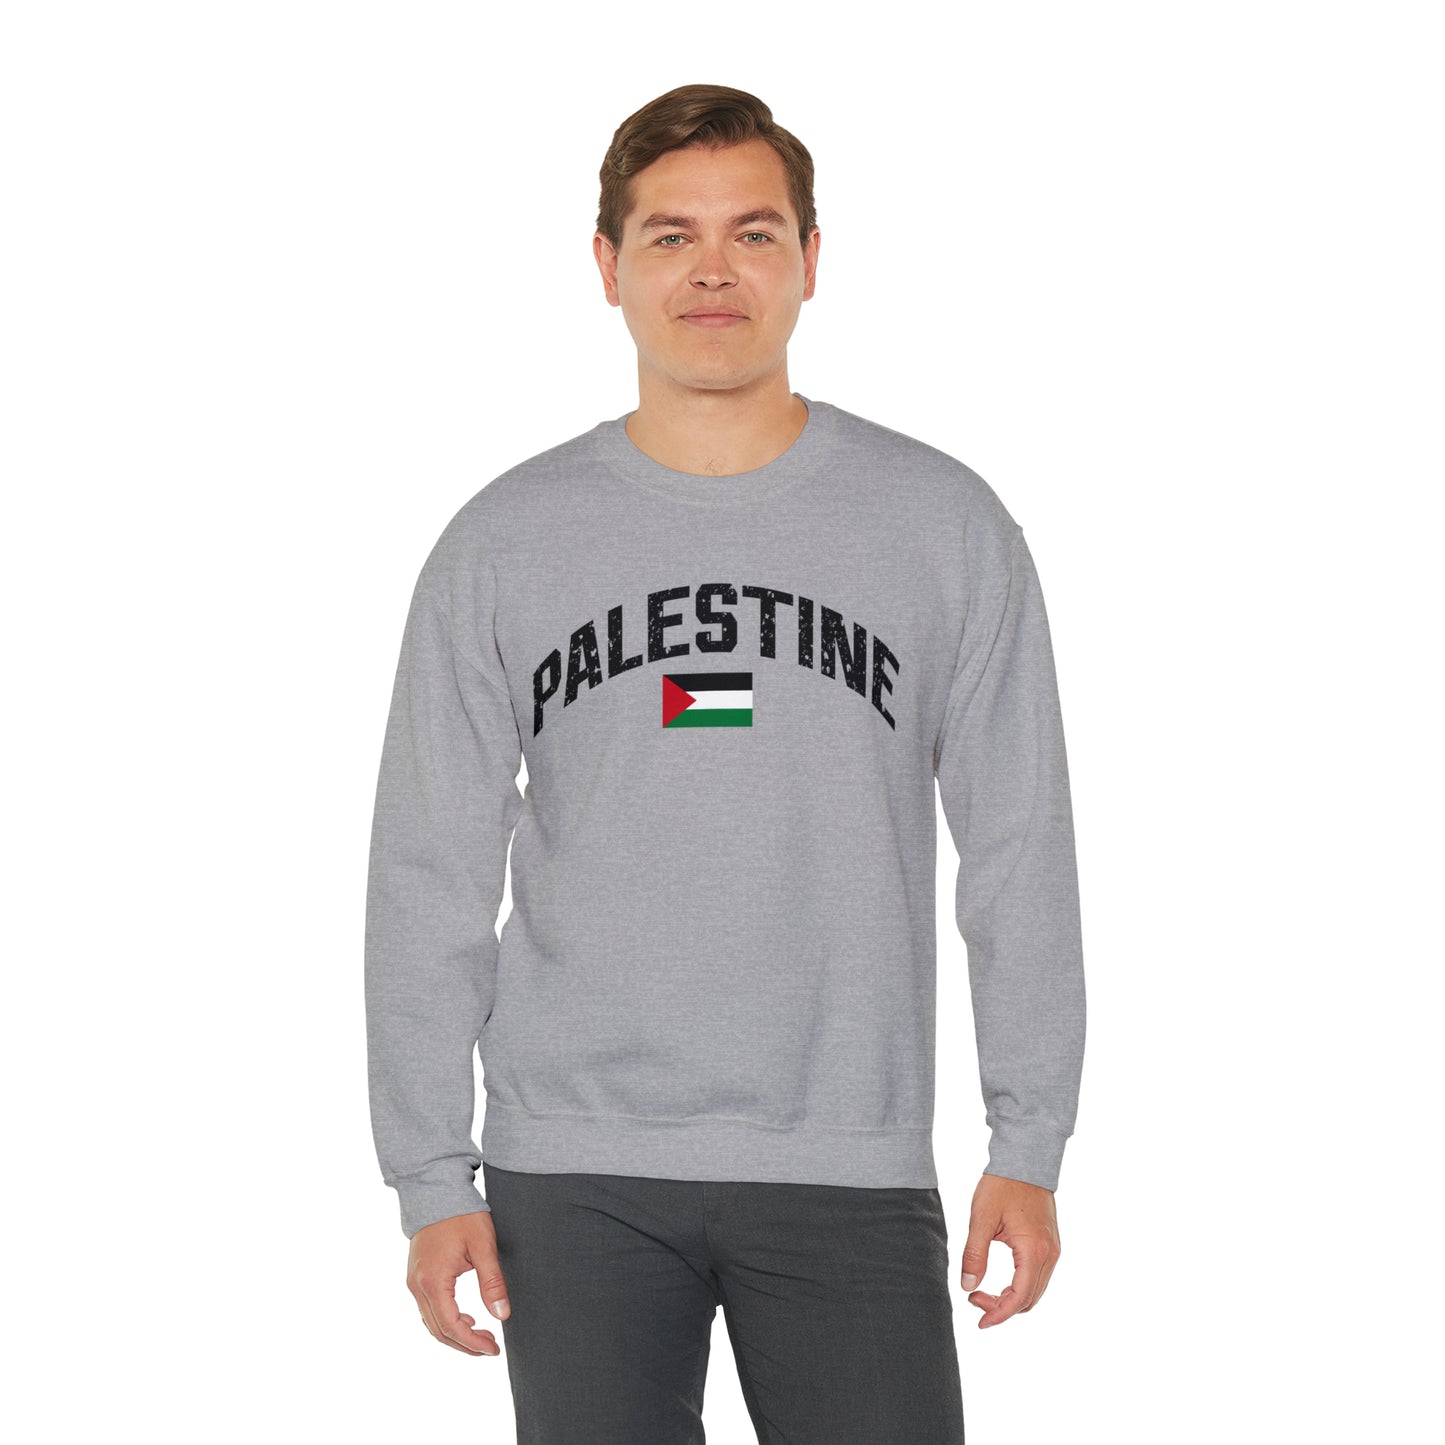 Free Palestine Sweatshirt, Free Palestine Sweatshirt, Palestine Flag Crewneck, Stand With Palestine Shirt, Gift For Palestinian, S847